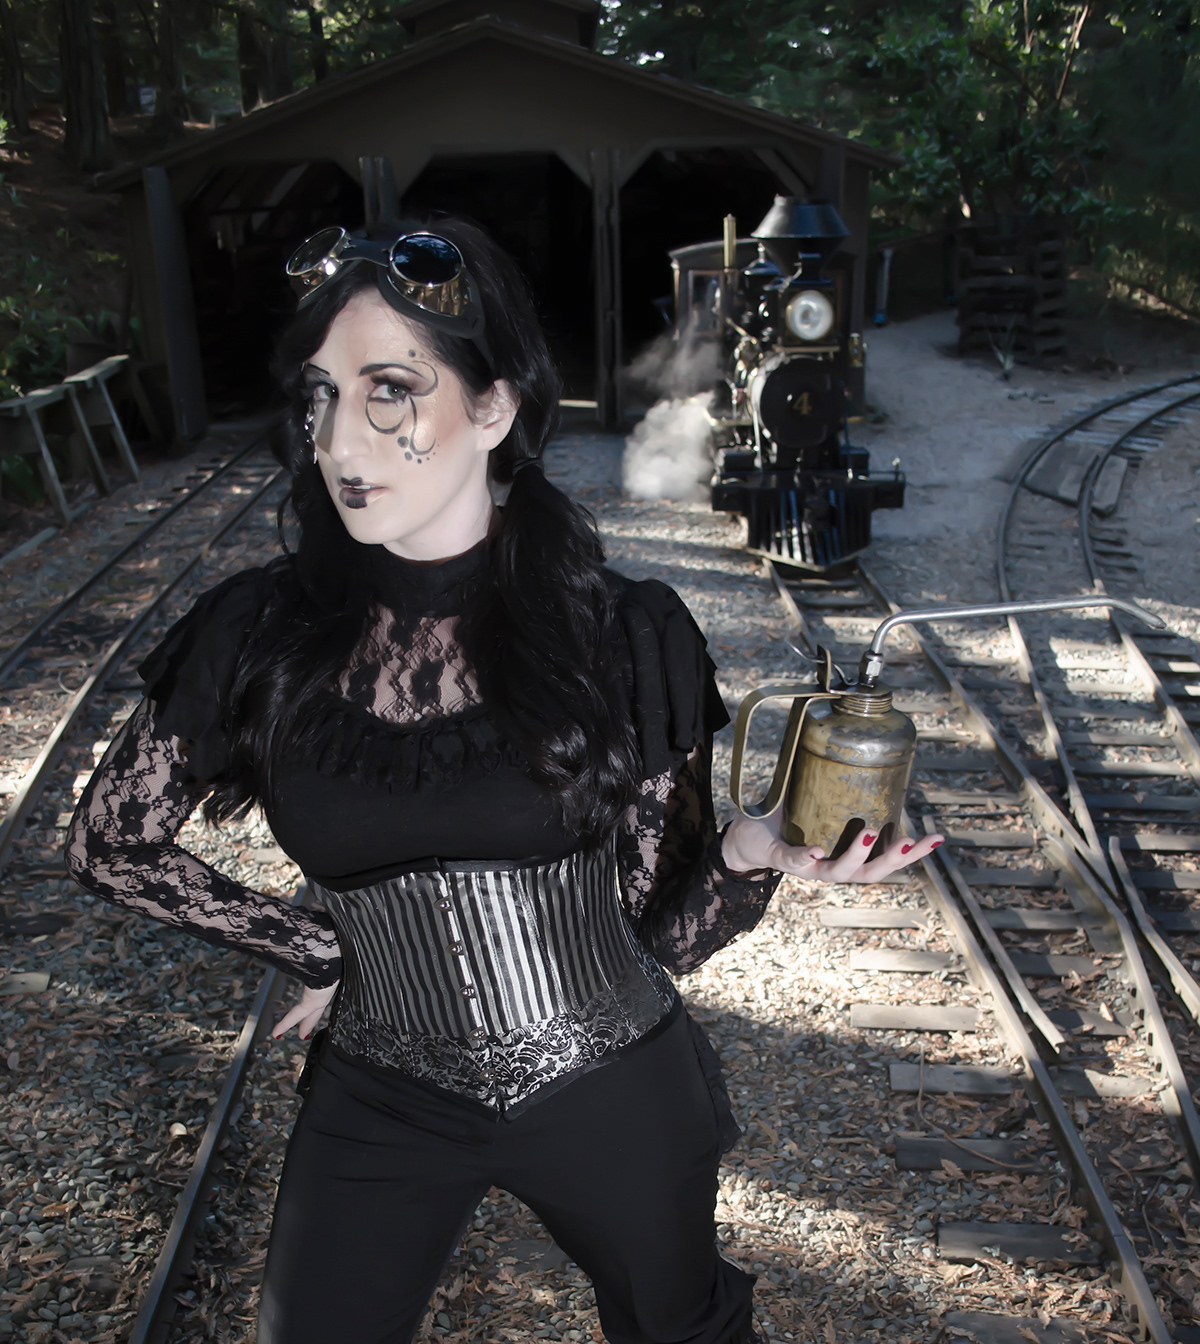 STEAMPUNK Ladies of steampunk Brandon Caffey  Photography  Cosplay model dark alternative emo gothic outdoors Natural Light black and white